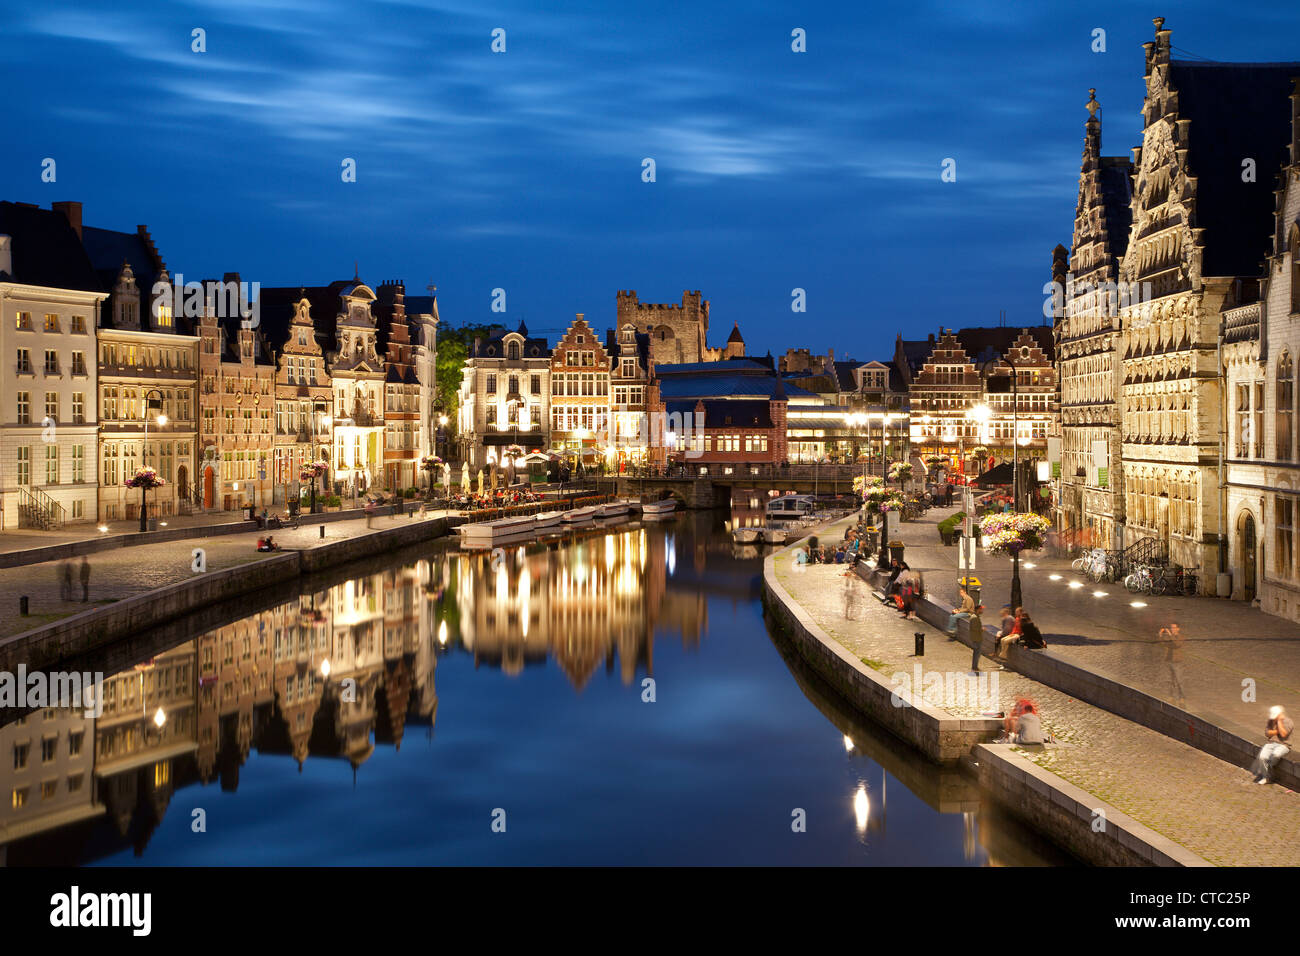 Gent - Palaces with the canal in evening from Korenlei and Graselei street on June 24, 2012 in Gent, Belgium. Stock Photo